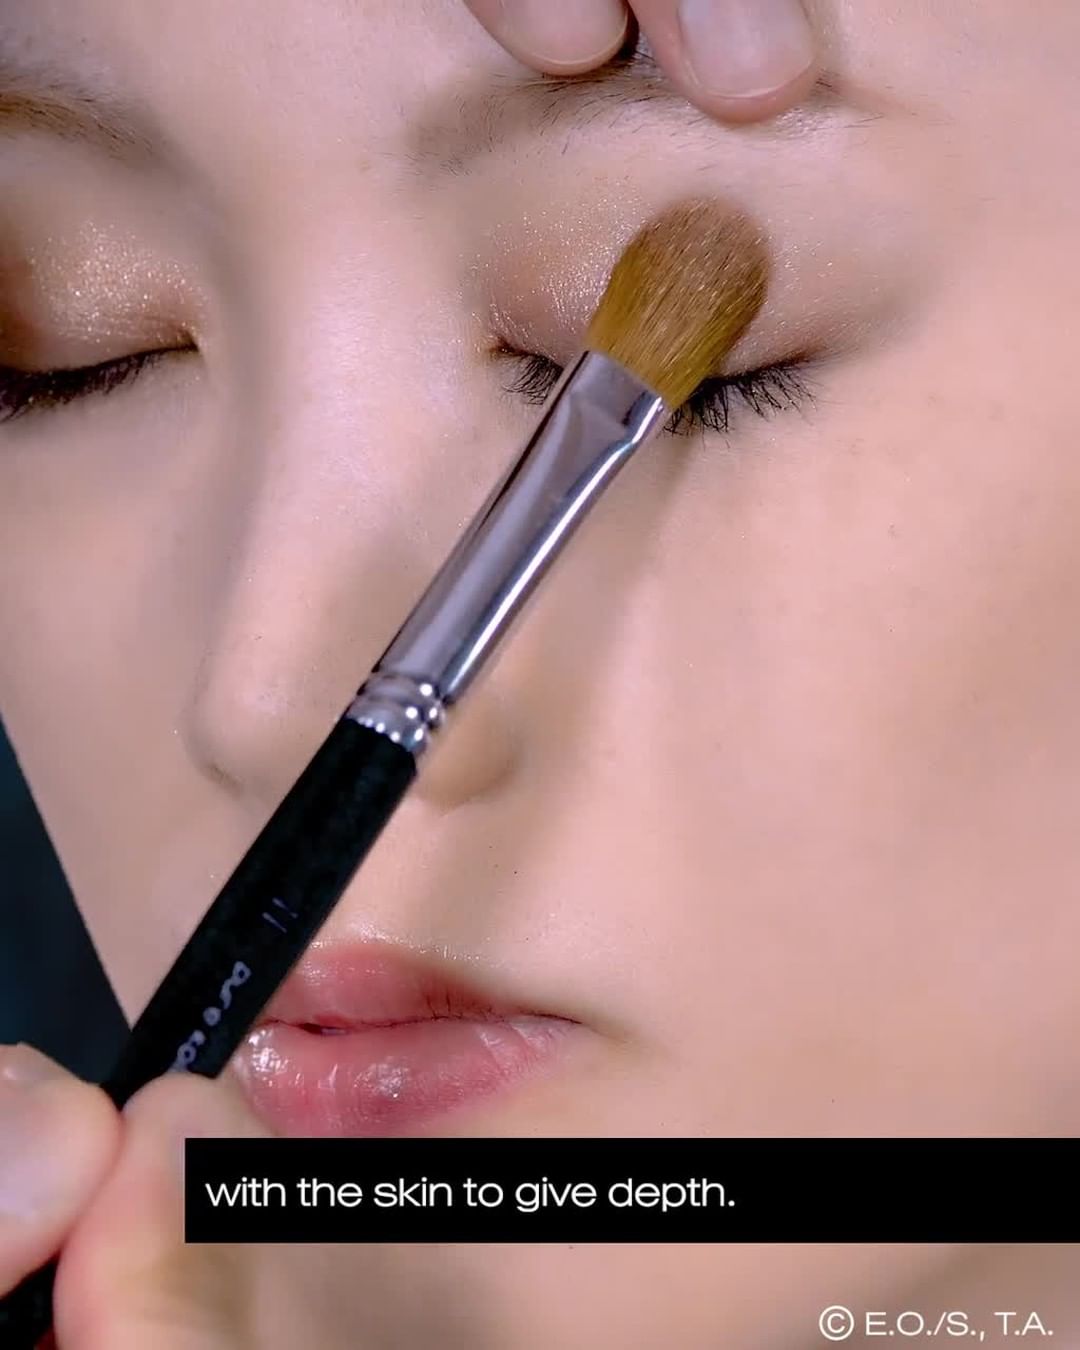 shu uemura - the dreamy and beautiful world of ONE PIECE is at your fingertips with the limited edition shu uemura ONE PIECE makeup collection. follow shu uemura international artistic director uchiid...